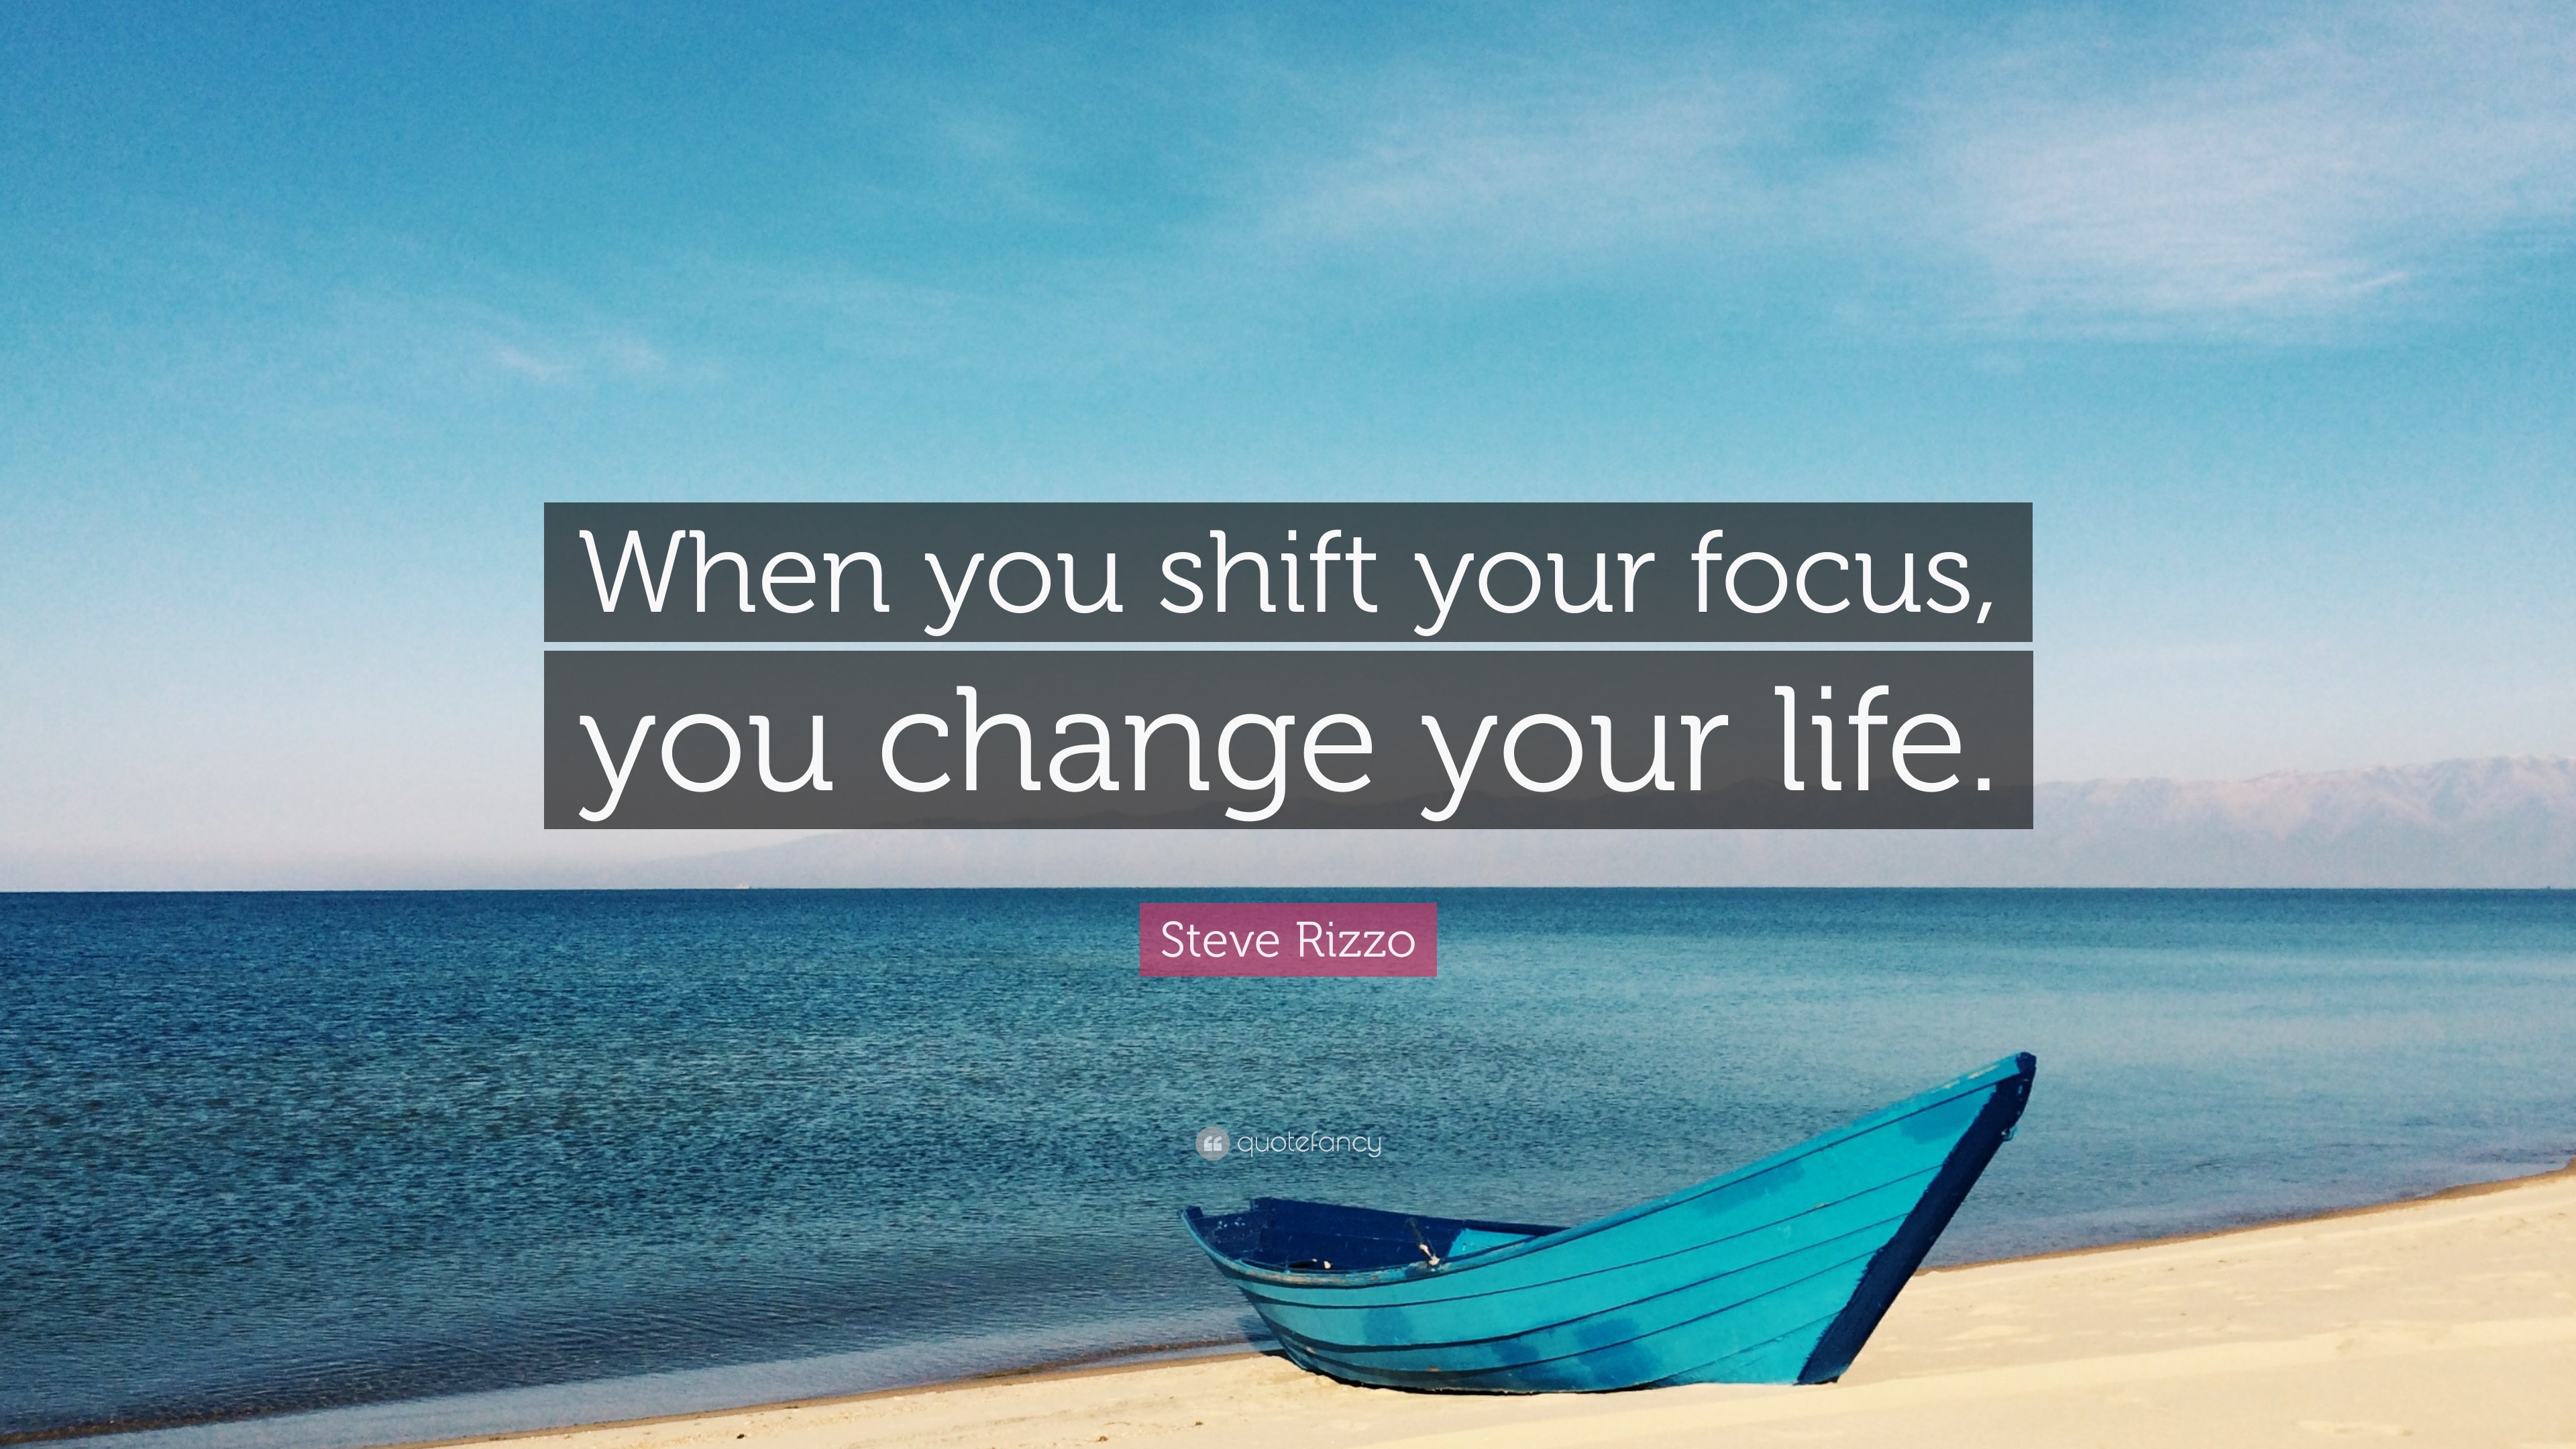 Steve Rizzo Quote: “When you shift your focus, you change your life.”